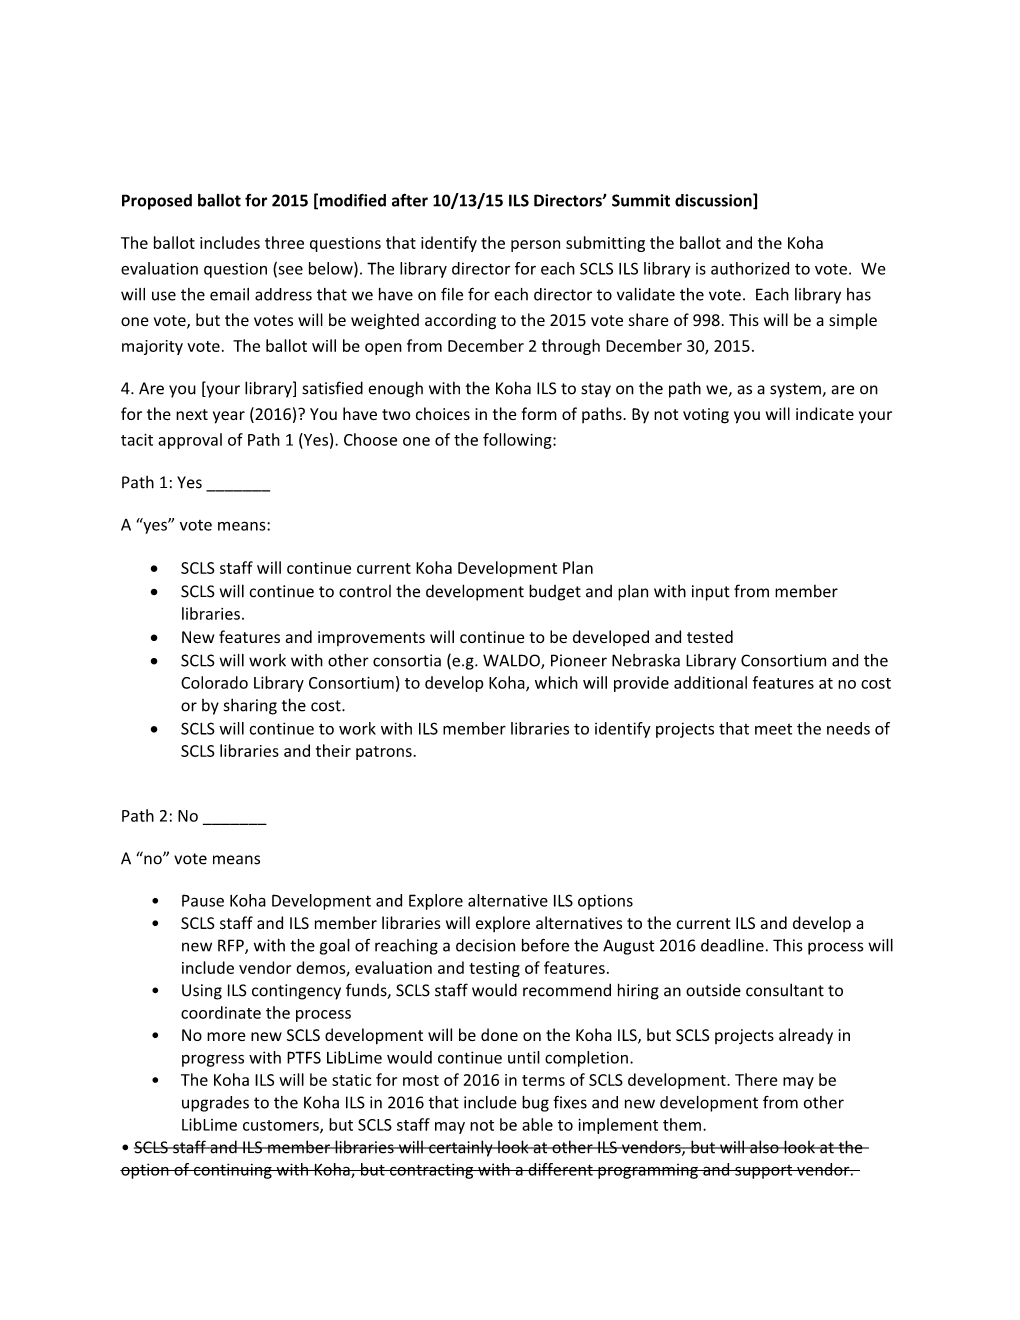 Proposed Ballot for 2015 Modified After 10/13/15 ILS Directors Summit Discussion